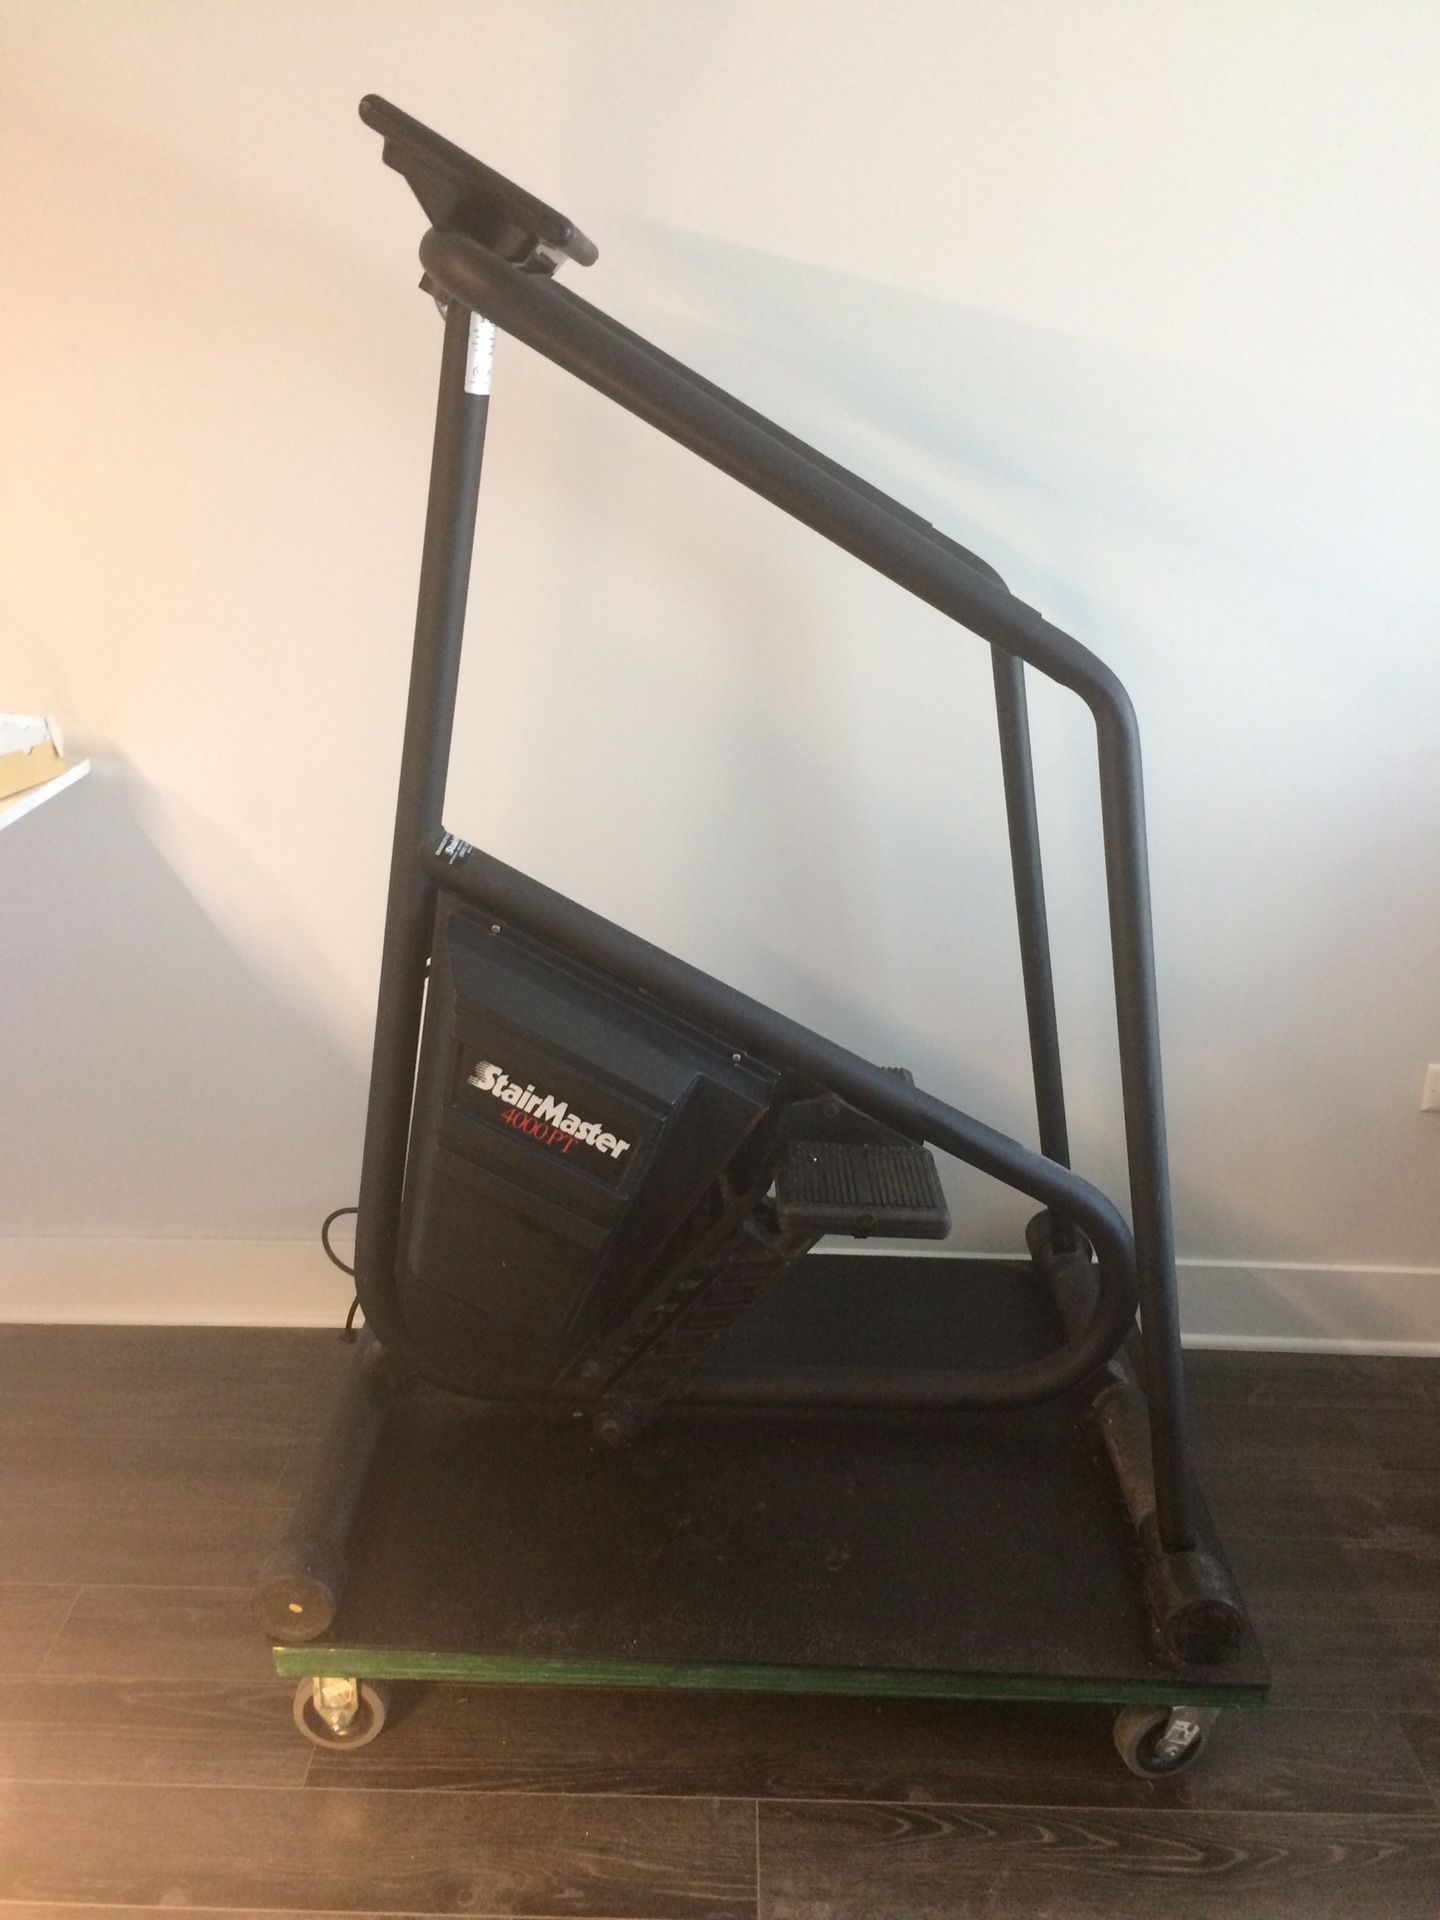 Stairmaster 4000PT . Well built and reliable. Sits on platform with wheels, so roll it into corner after working out. For pickup. Asking $125 obo.